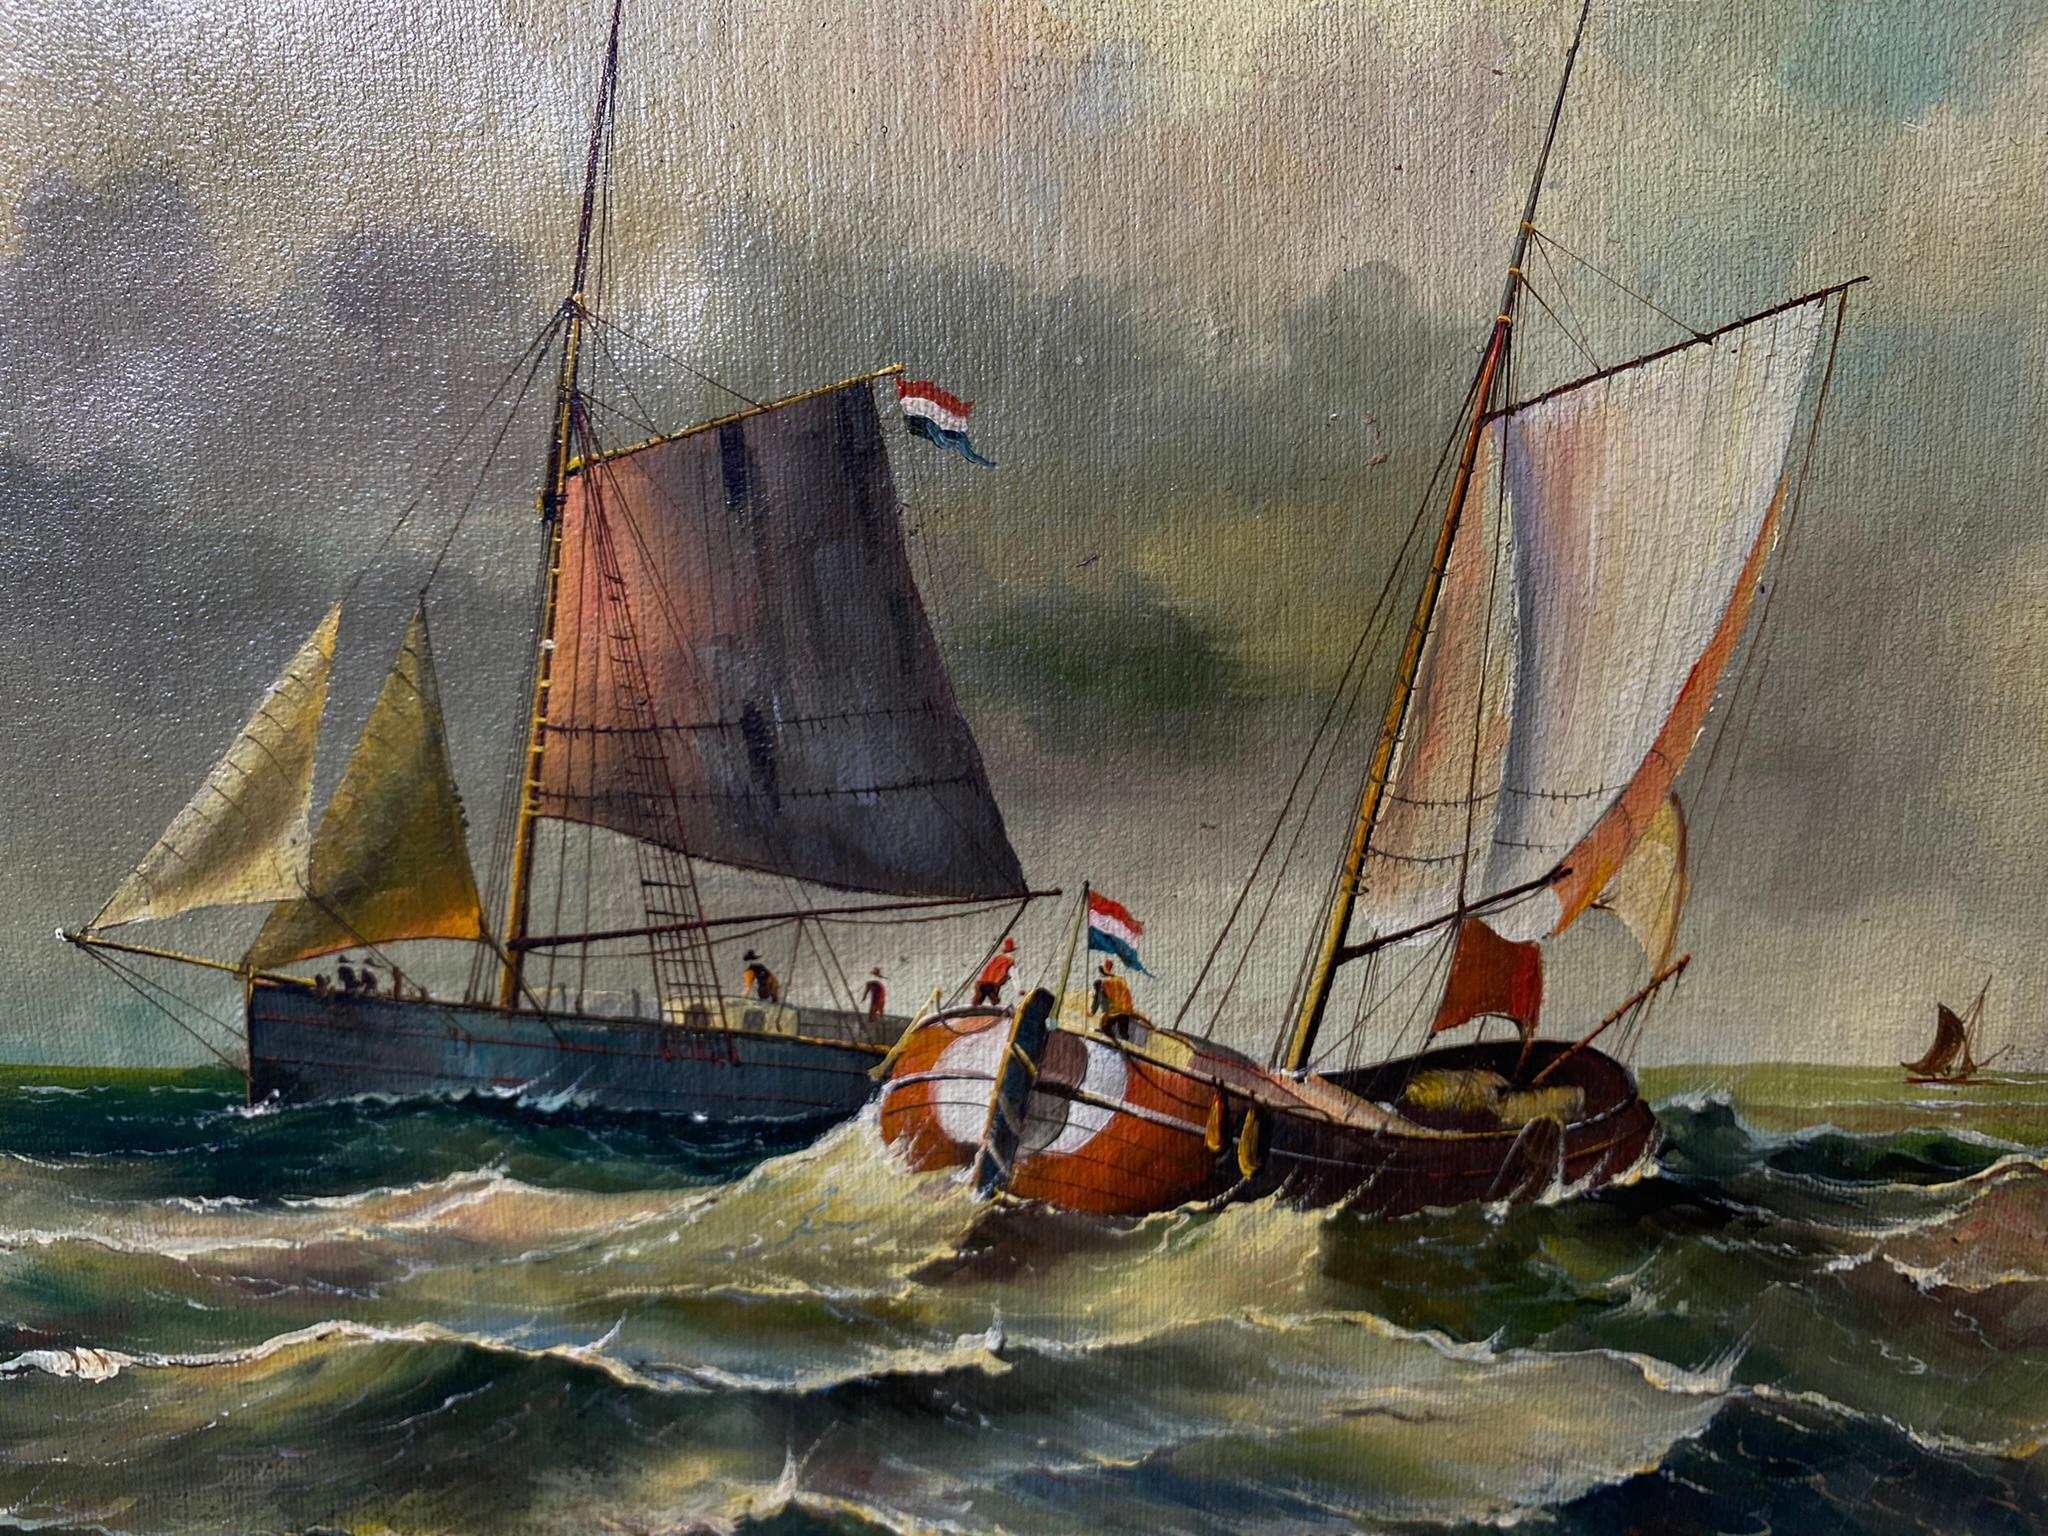 Early 20th c. European Naval Nautical Scene Oil on Canvas Painting